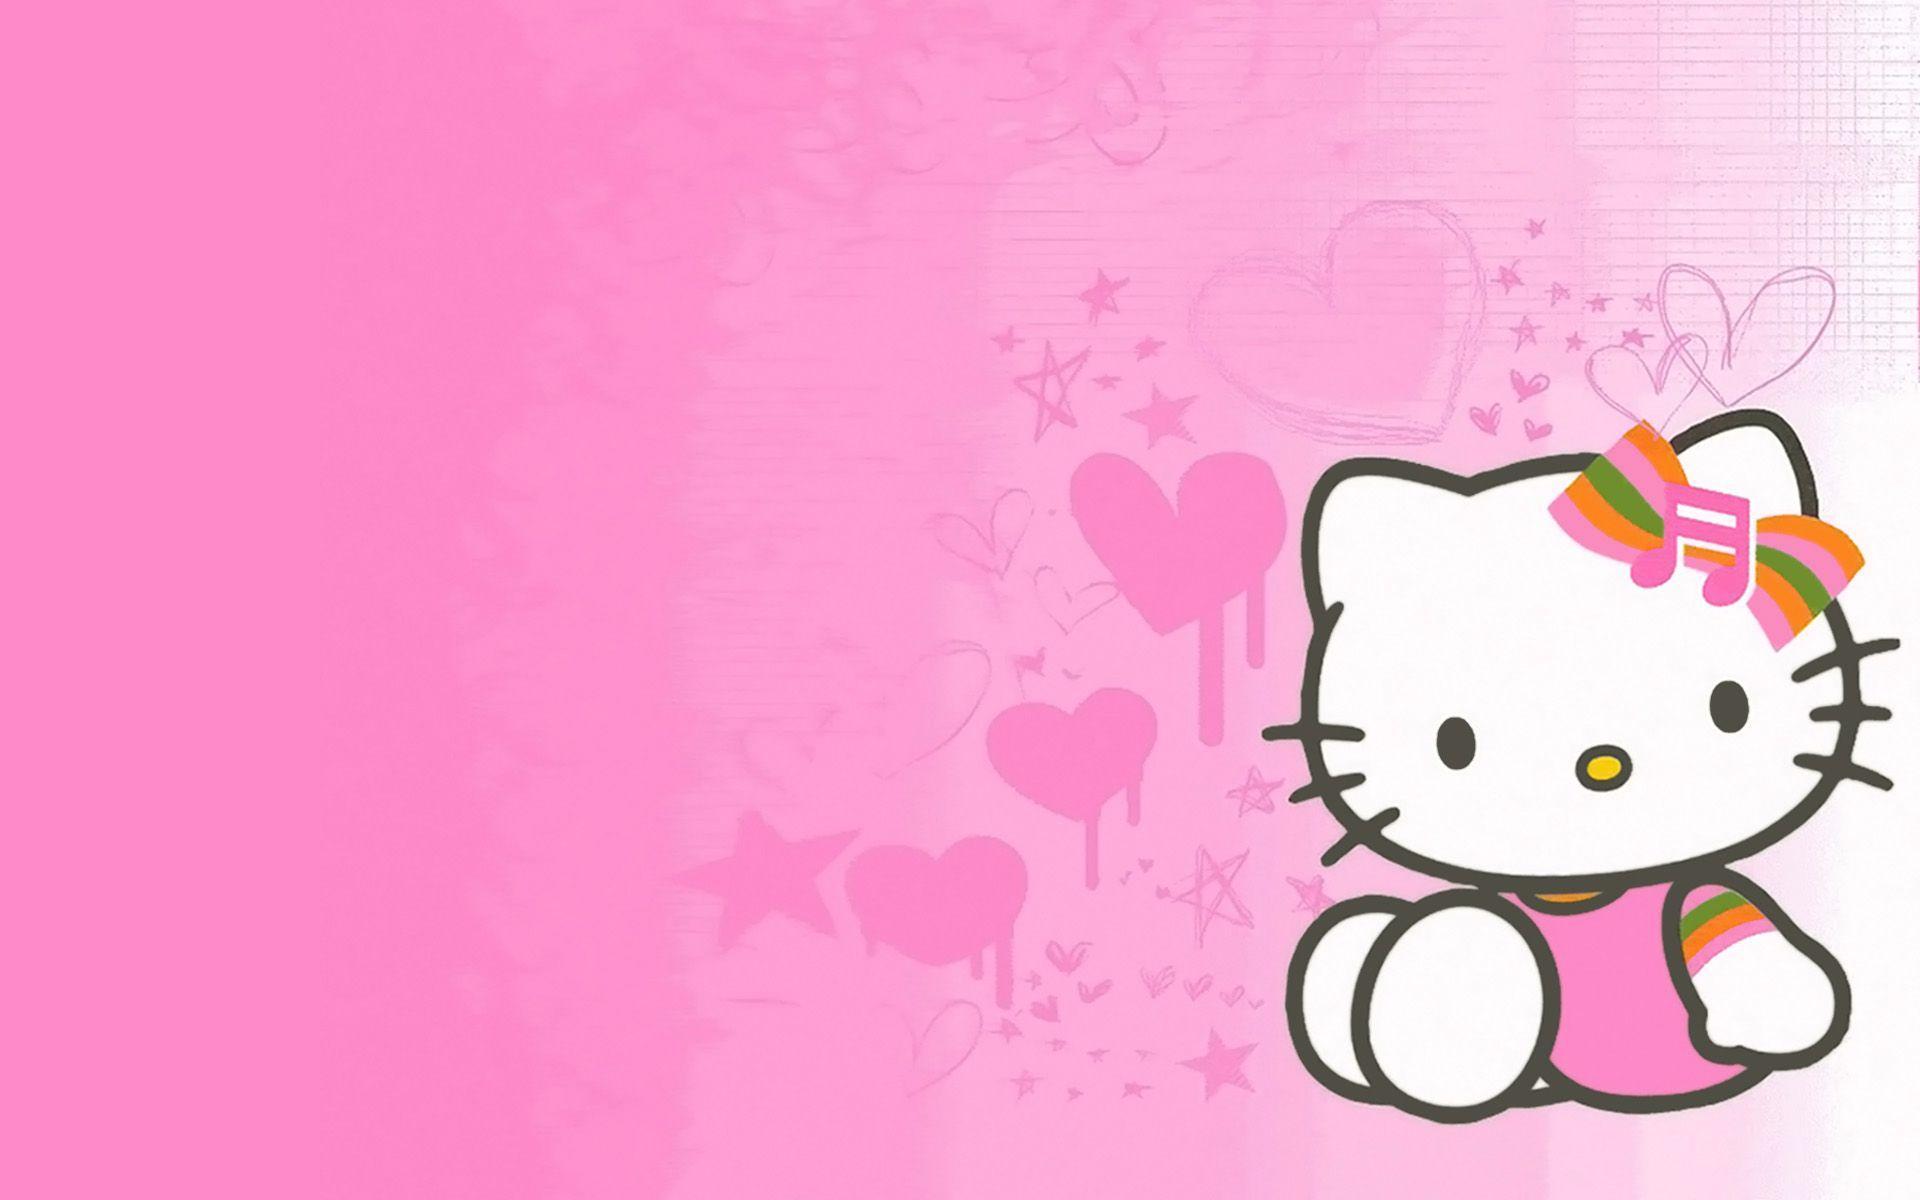 Download Wallpaper Hello Kitty 3d Image Num 30